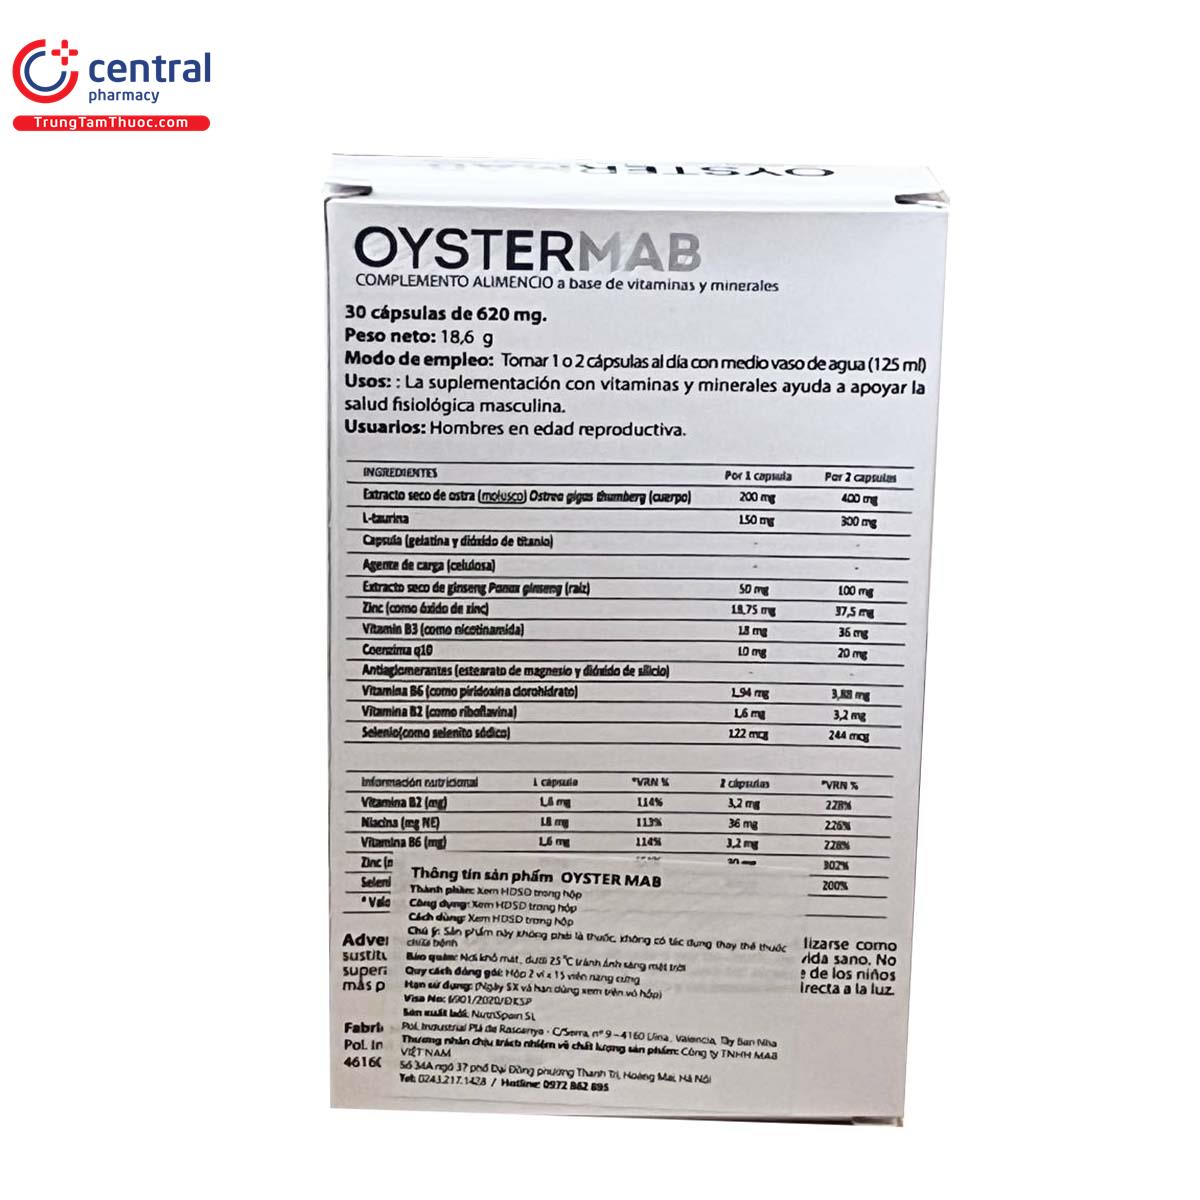 OYSTER MAB